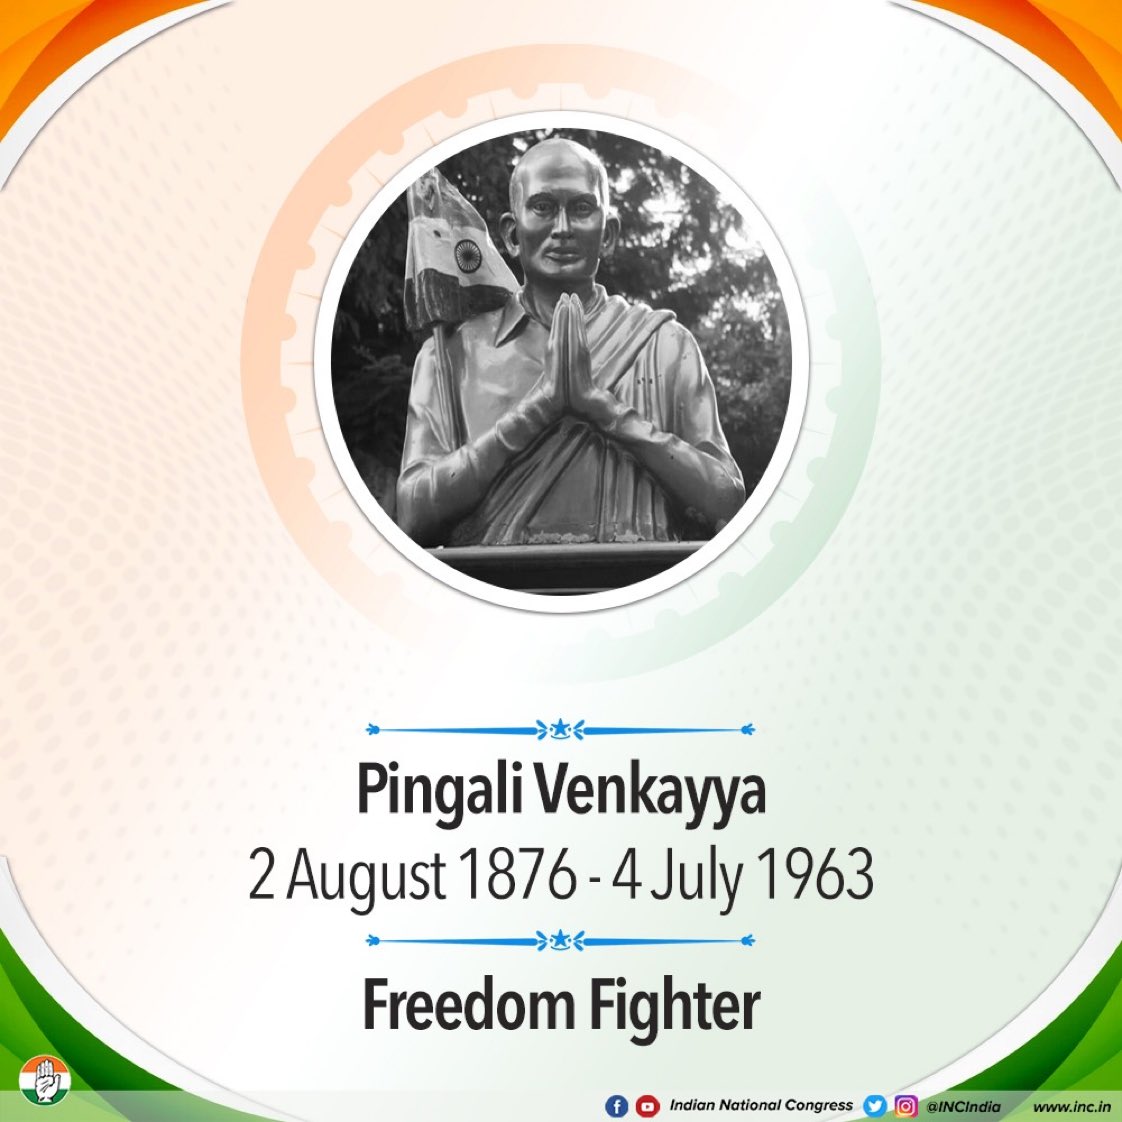 Remembering #PingaliVenkayya, the legend who gave us our iconic national flag, a symbol of our rich heritage and unity. On his death anniversary, let us remember his contribution and renew our commitment to building a strong and inclusive India. 

#RememberingPingaliVenkayya…